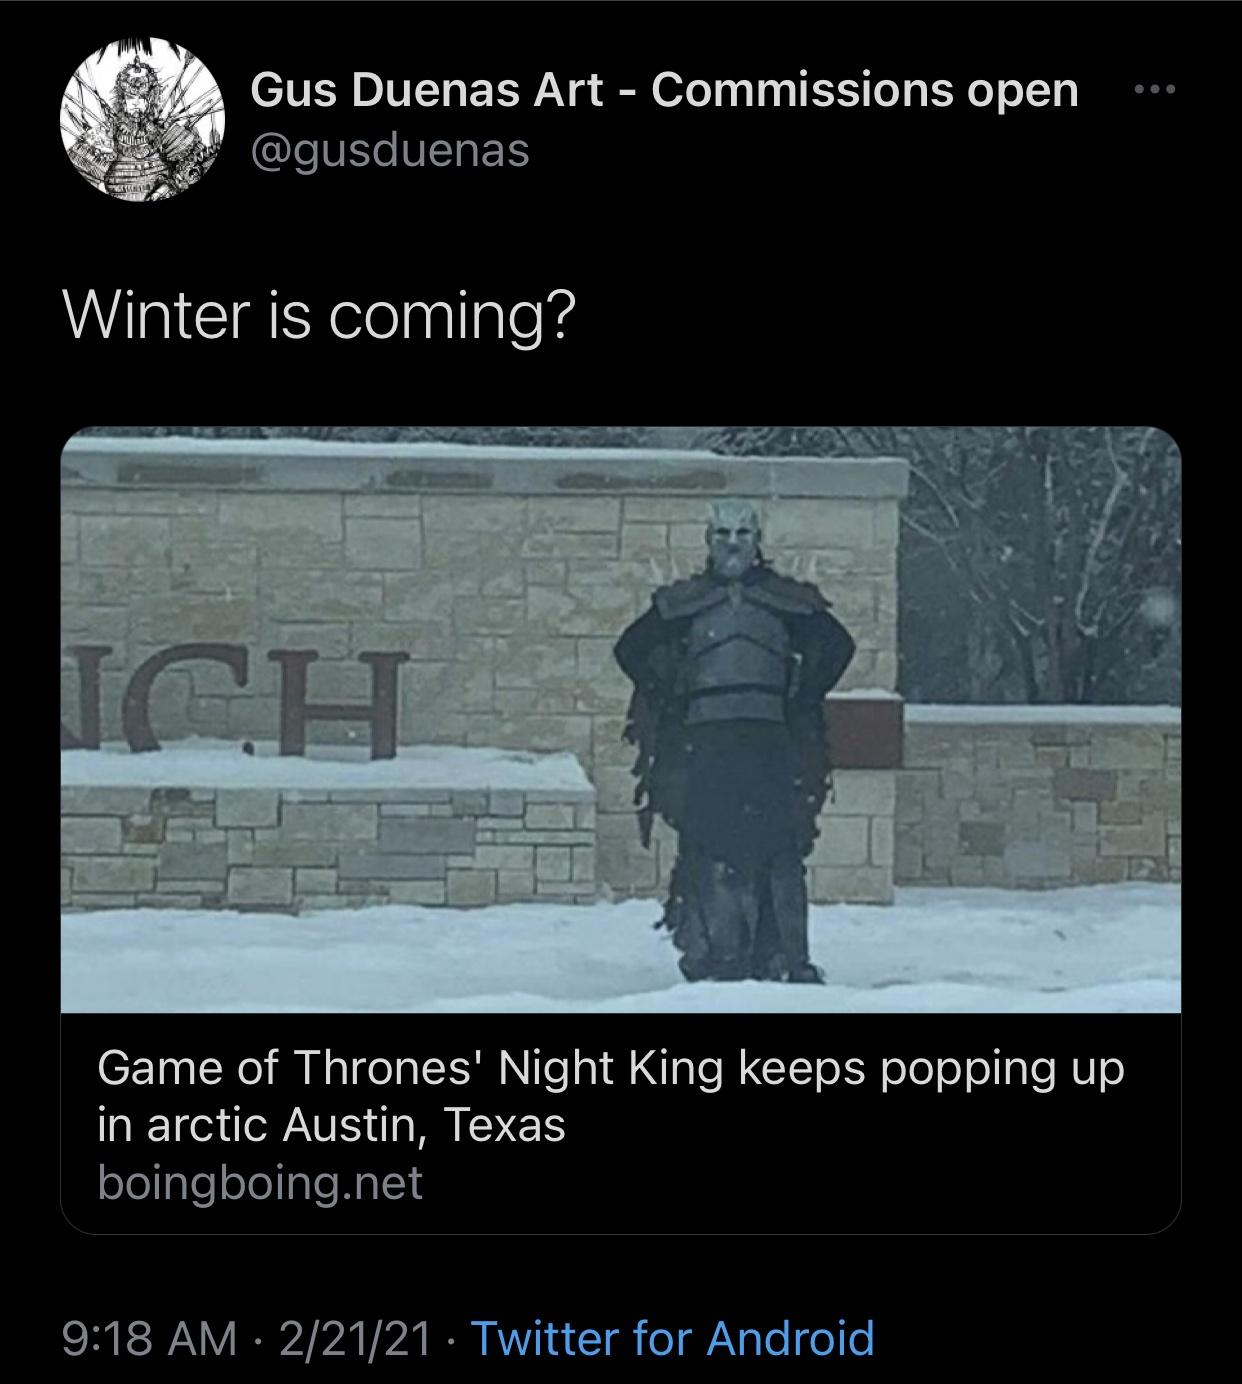 screenshot - Gus Duenas Art Commissions open Winter is coming? Ich Game of Thrones' Night King keeps popping up in arctic Austin, Texas boingboing.net 22121 Twitter for Android